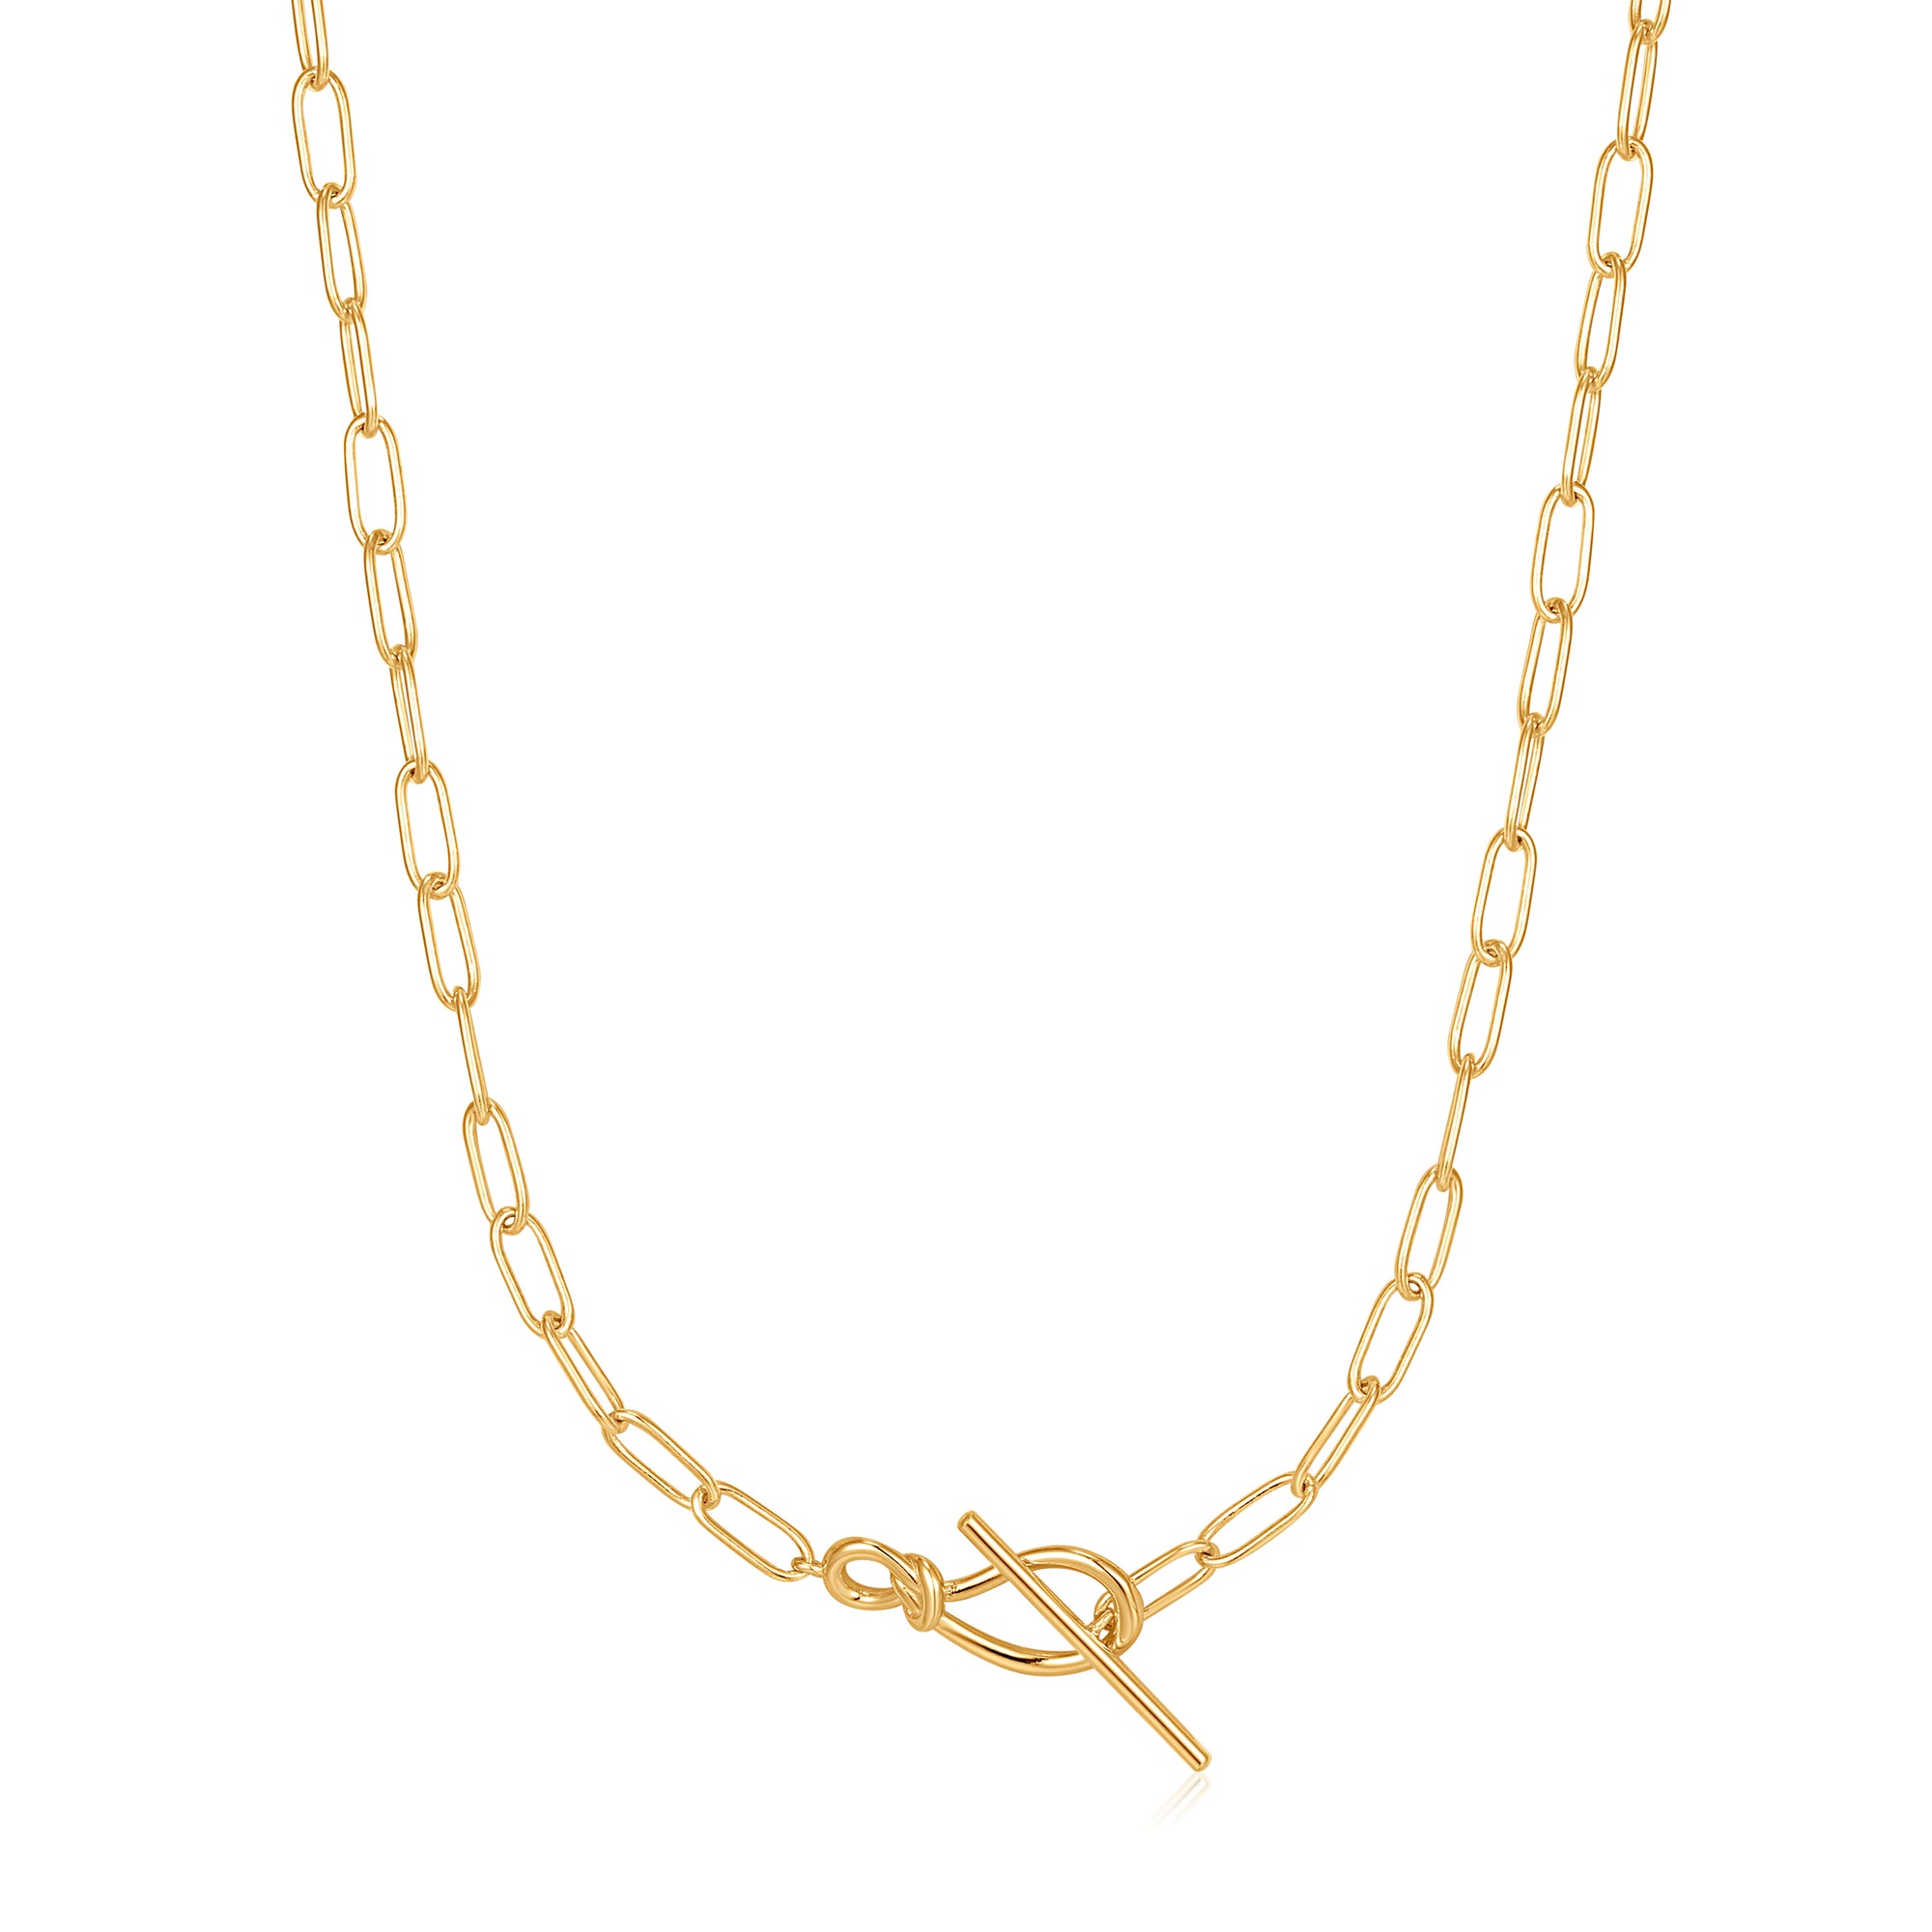 ANIA HAIE ANIA HAIE - Gold Knot T Bar Chain Necklace available at The Good Life Boutique